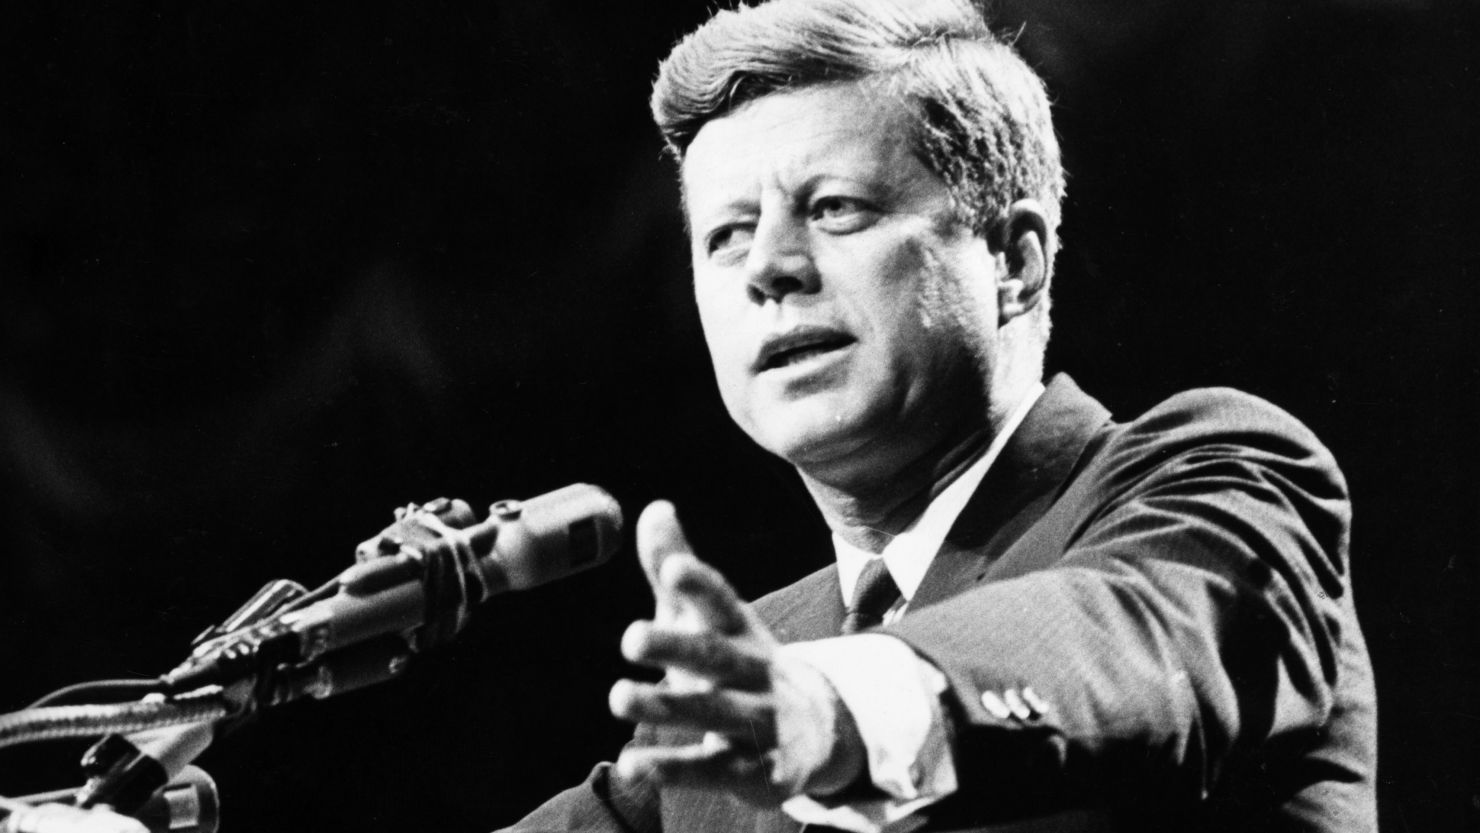 President John F. Kennedy, shown in 1962, was a champion of rights and services for the mentally ill.
